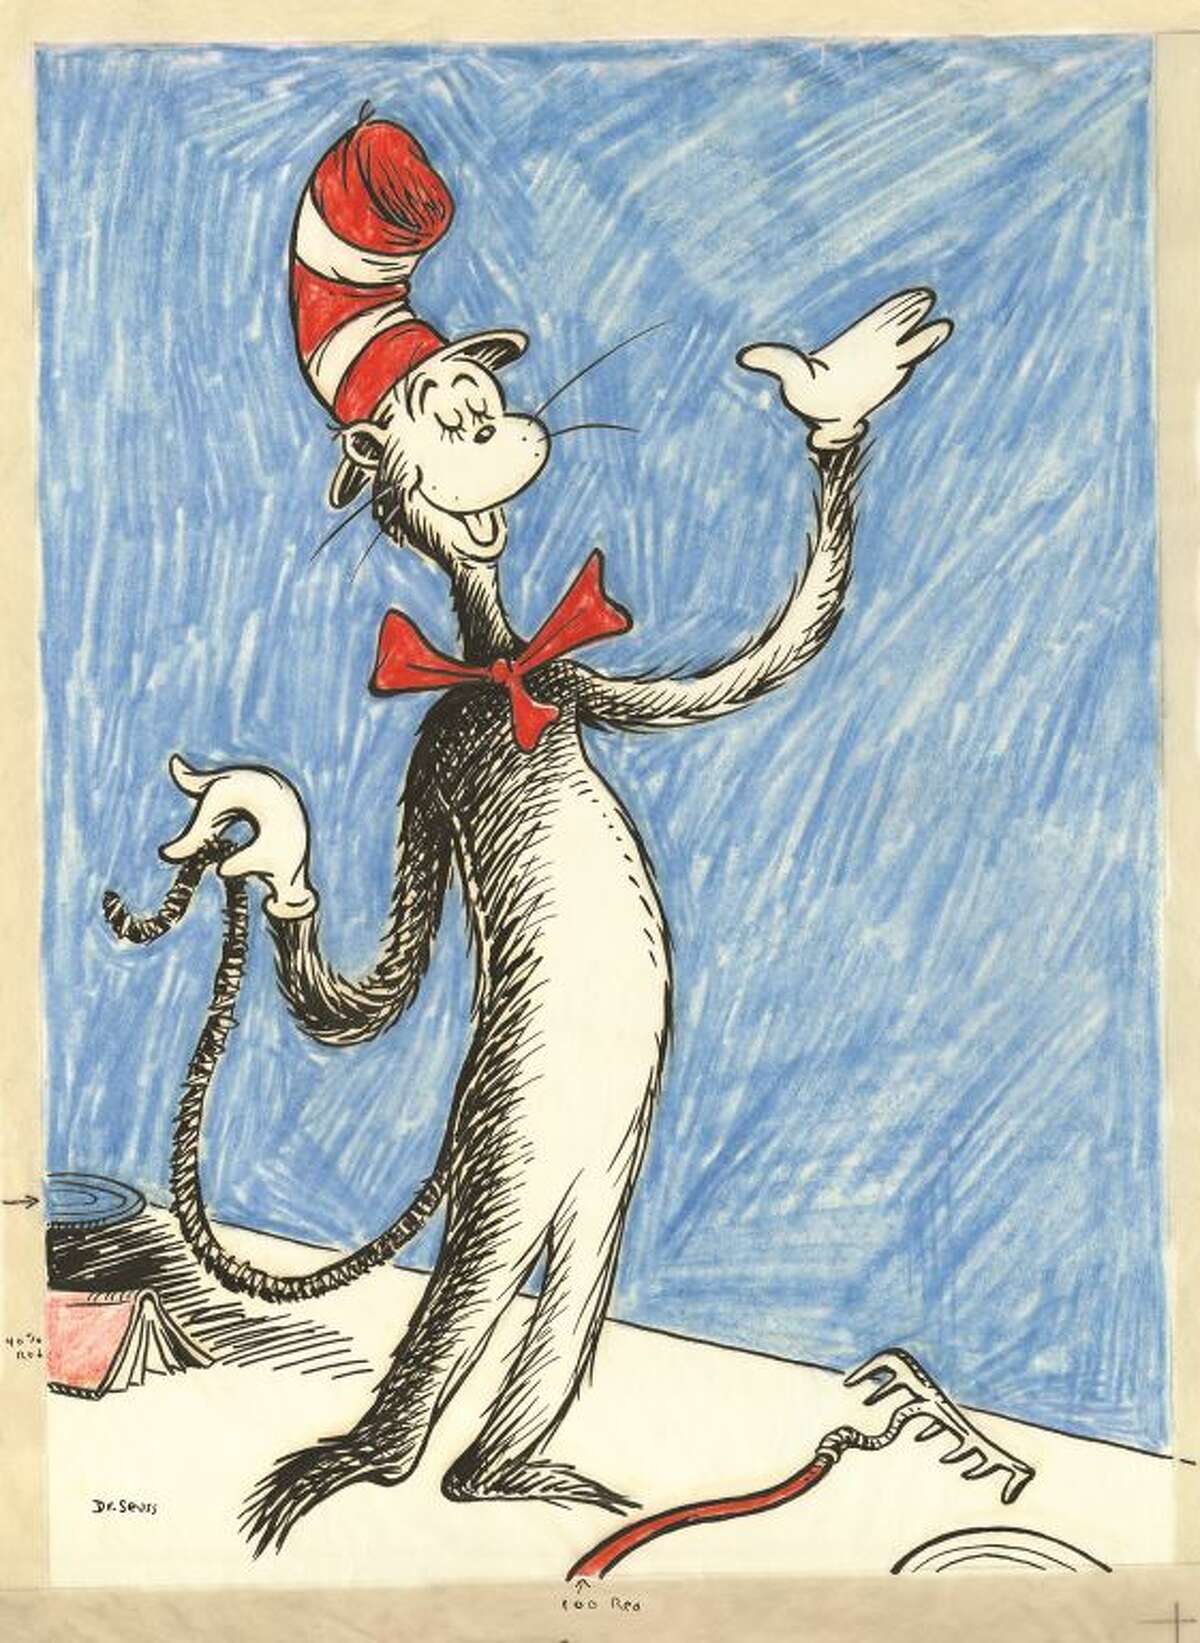 On that cold, cold wet day In the 1950s, parents and educators became concerned that children weren't reading because their books were too dull. The head of the education division at Houghton Mifflin, William Ellsworth Spaudling, asked Theodor Seuss Geisel, a successful illustrator, to create an entertaining book using only 348 core words.